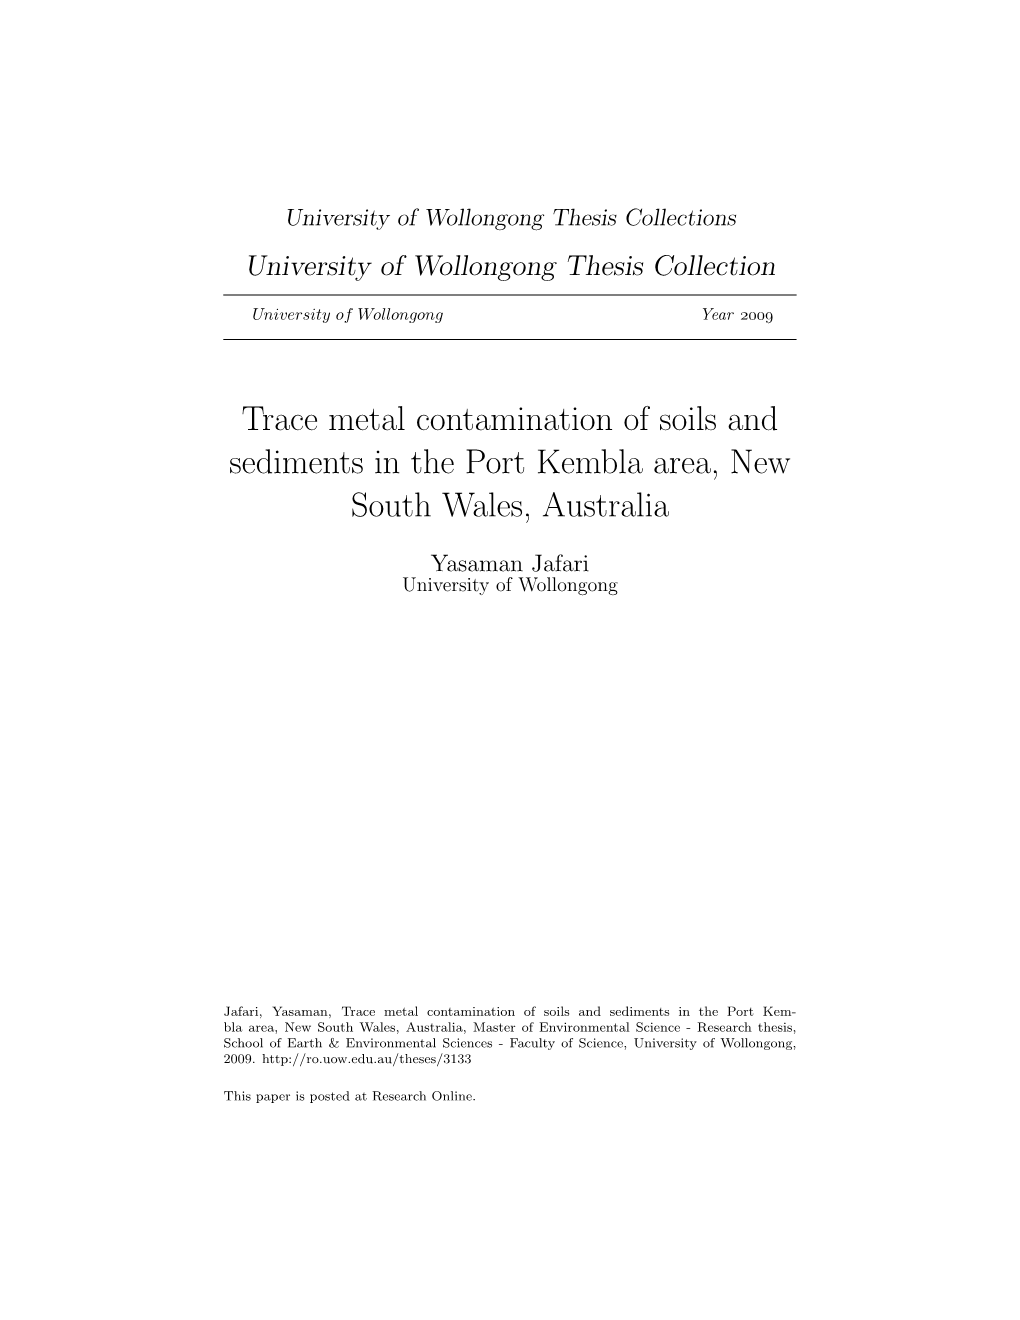 Trace Metal Contamination of Soils and Sediments in the Port Kembla Area, New South Wales, Australia